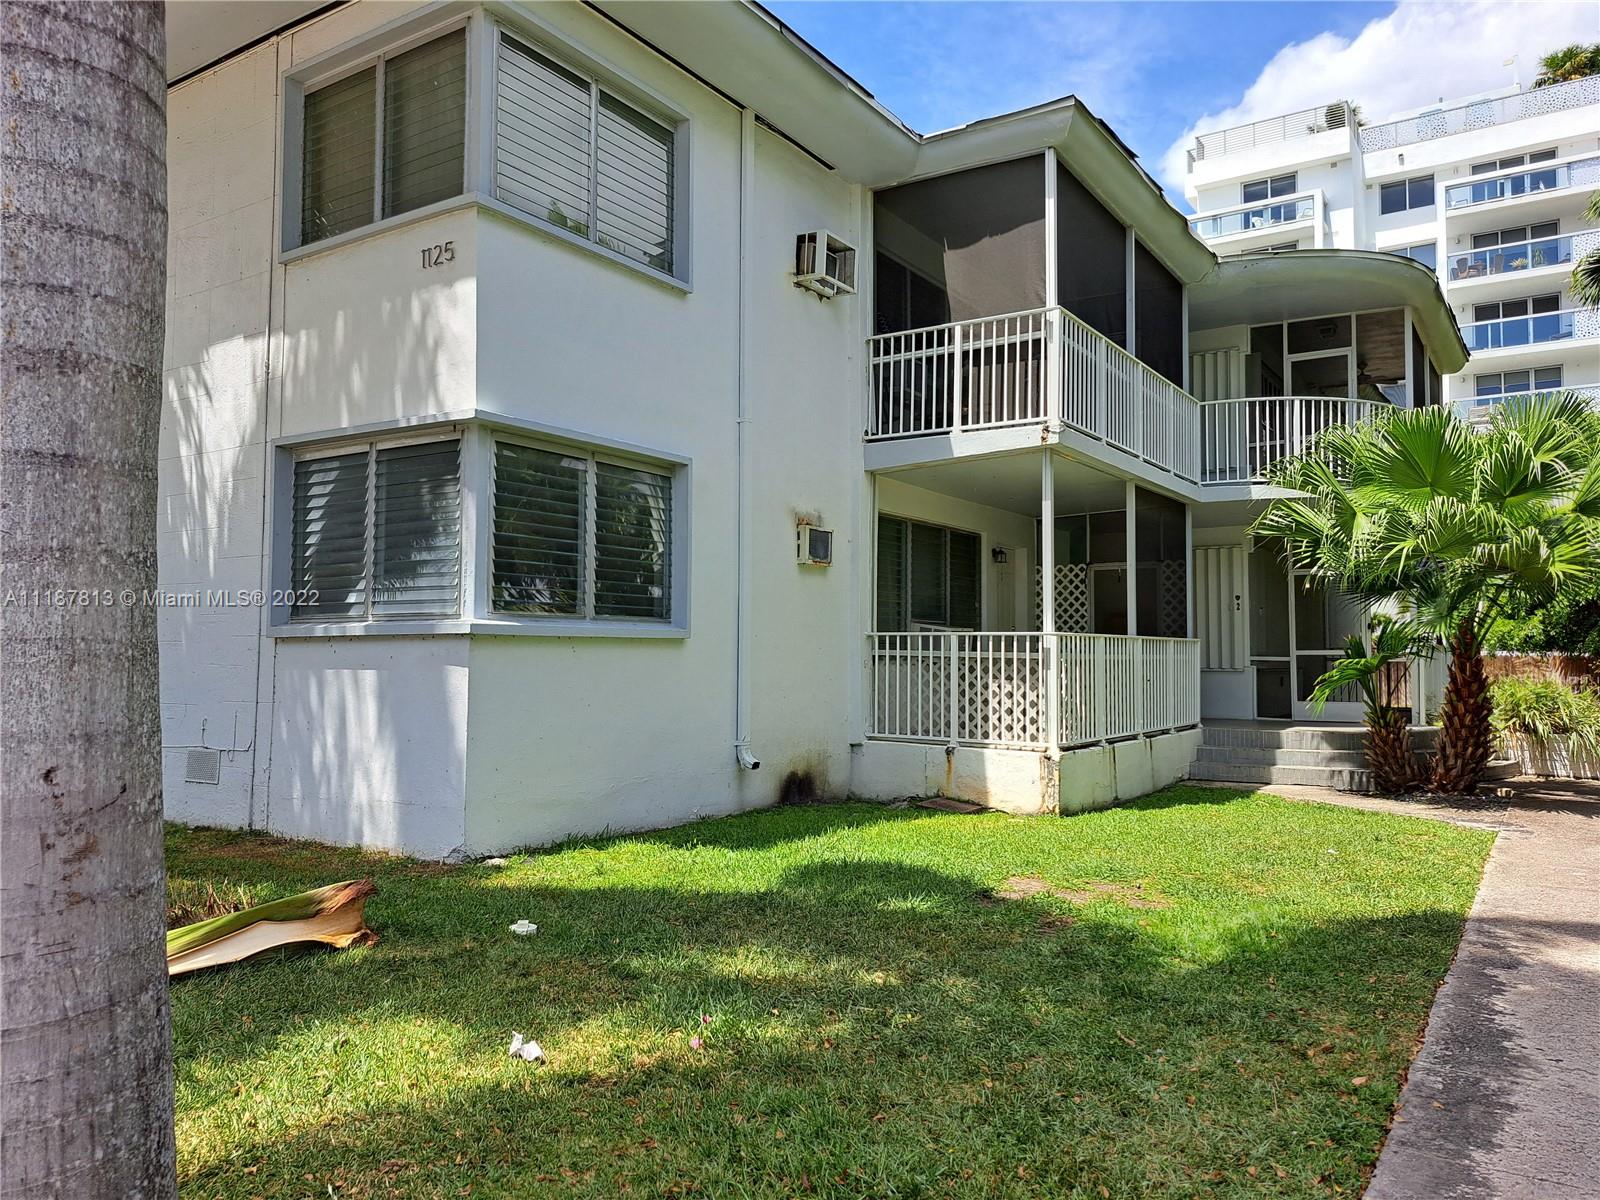 Beautiful location, 2 bedroom 1 bath unit in Bay Harbor Island, 2 story building. Just 4 blocks away to Kane Concourse, 15 minutes walk to the beaches and walking distance to worship house. Minutes from shopping and restaurants. Unit is under probate.